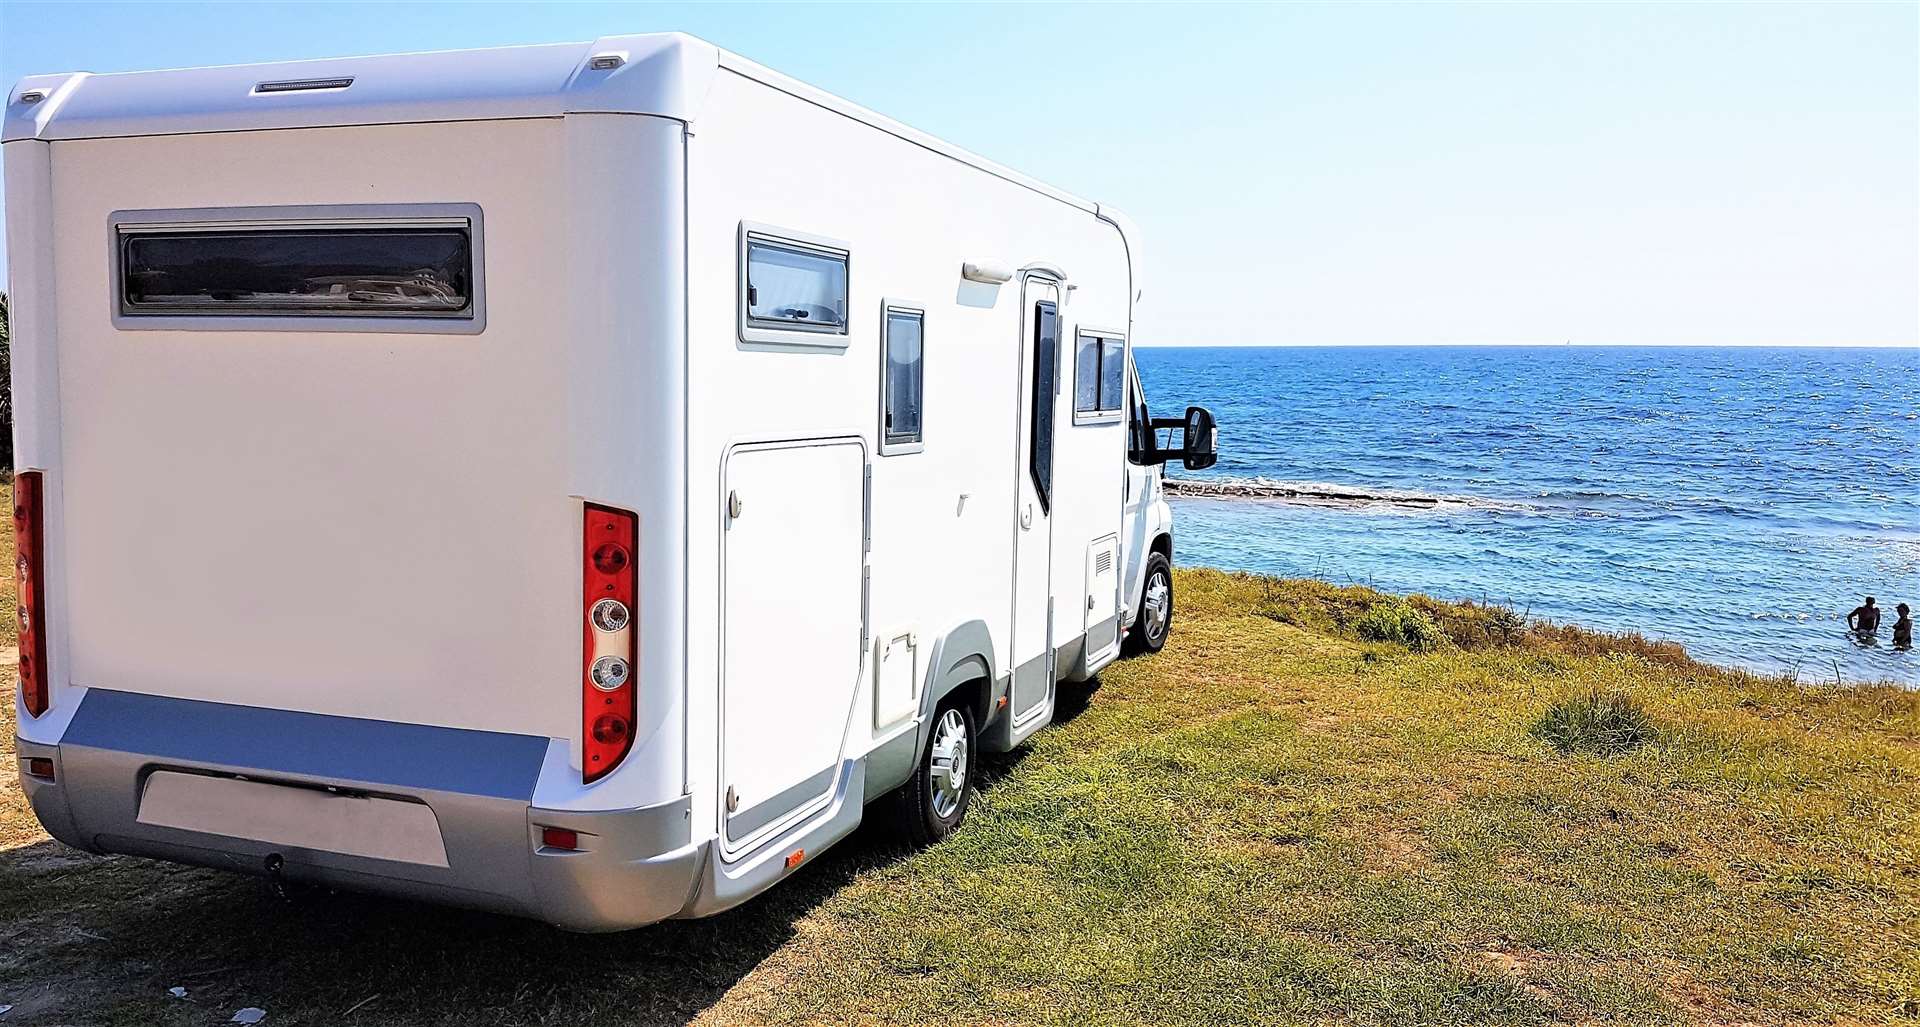 Motorhome parking may be easier thanks to Highland Council easing regulations.